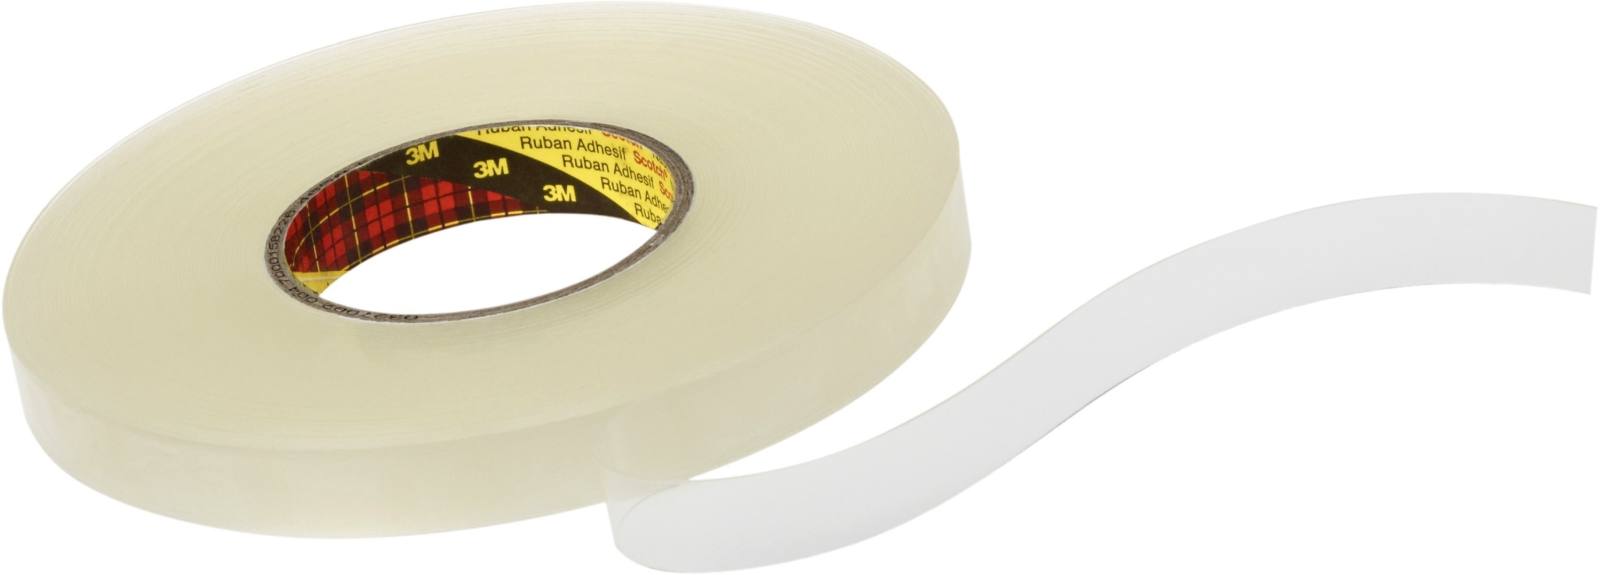 3M Double-sided removable adhesive tape 4658F, transparent, 15 mm x 25 m, 0.8 mm